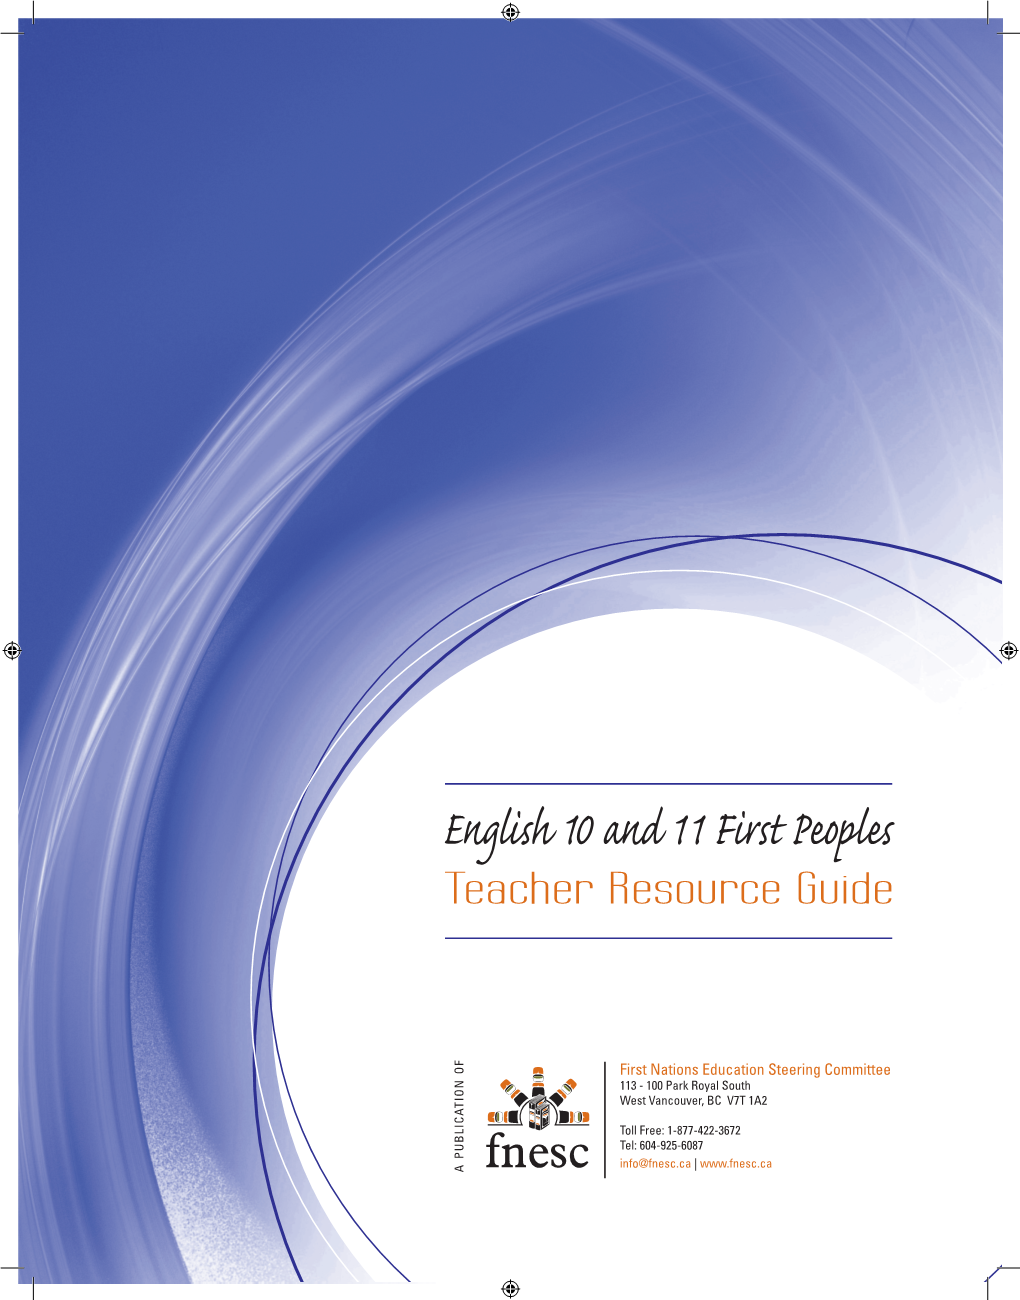 English 10 and 11 First Peoples Teacher Resource Guide Writing Team